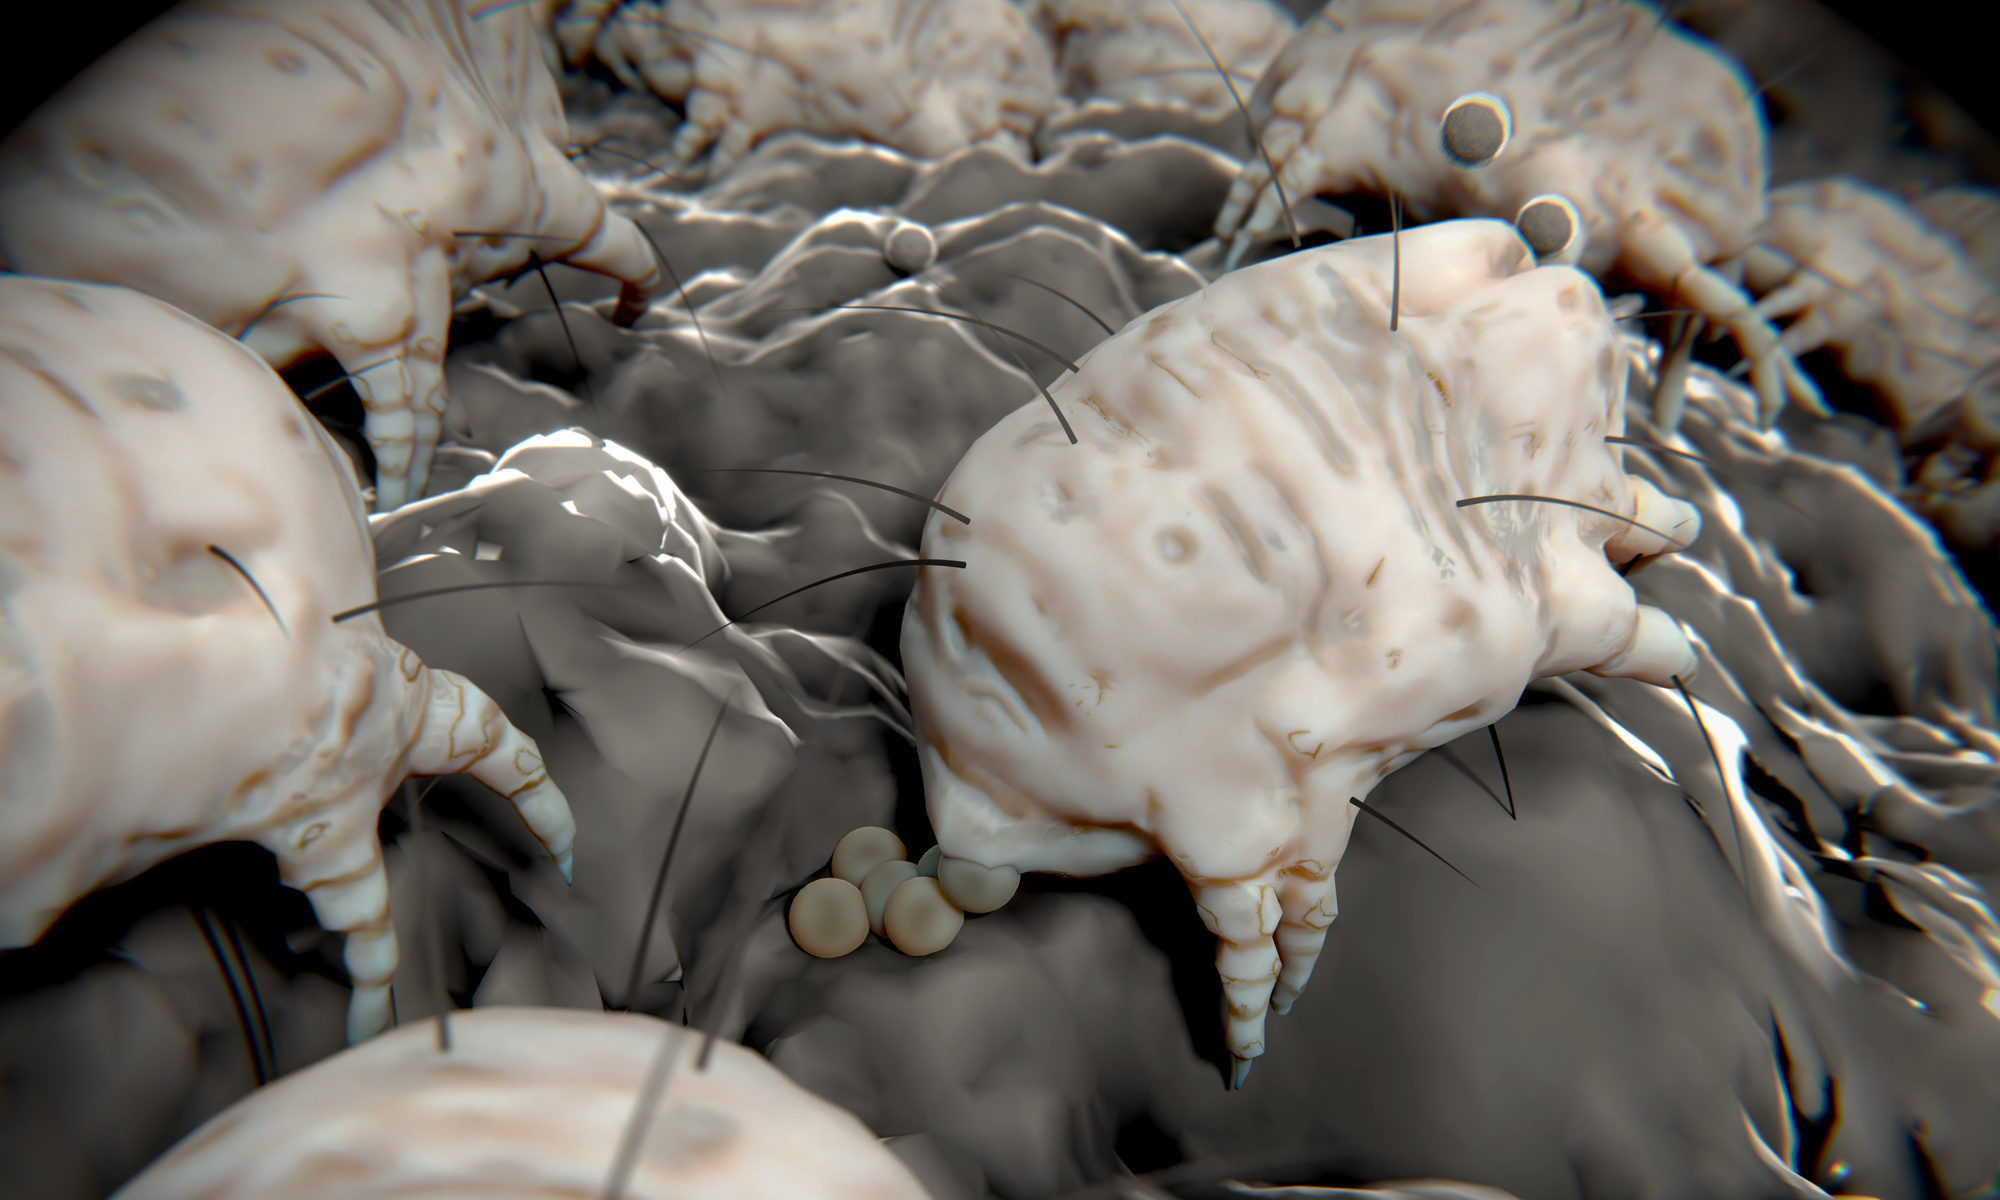 B&W rendering of dust mites and the debris they leave behind